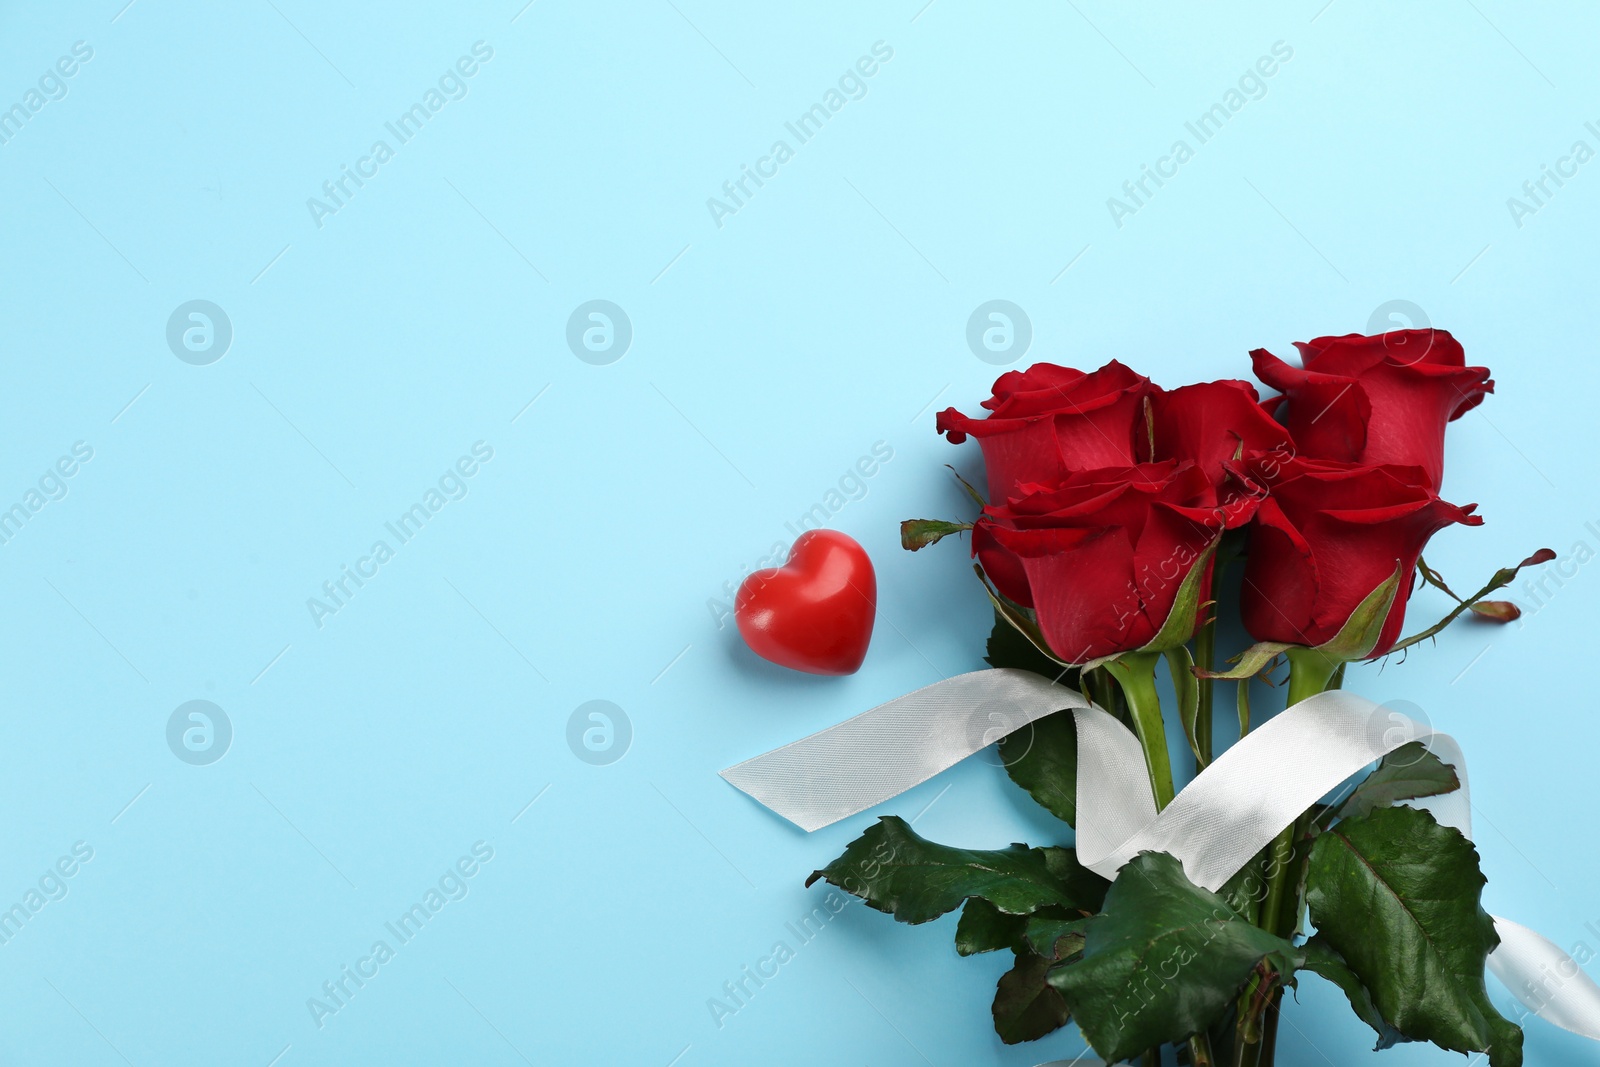 Photo of Beautiful red roses, white ribbon and decorative heart on light blue background, flat lay with space for text. Valentine's Day celebration